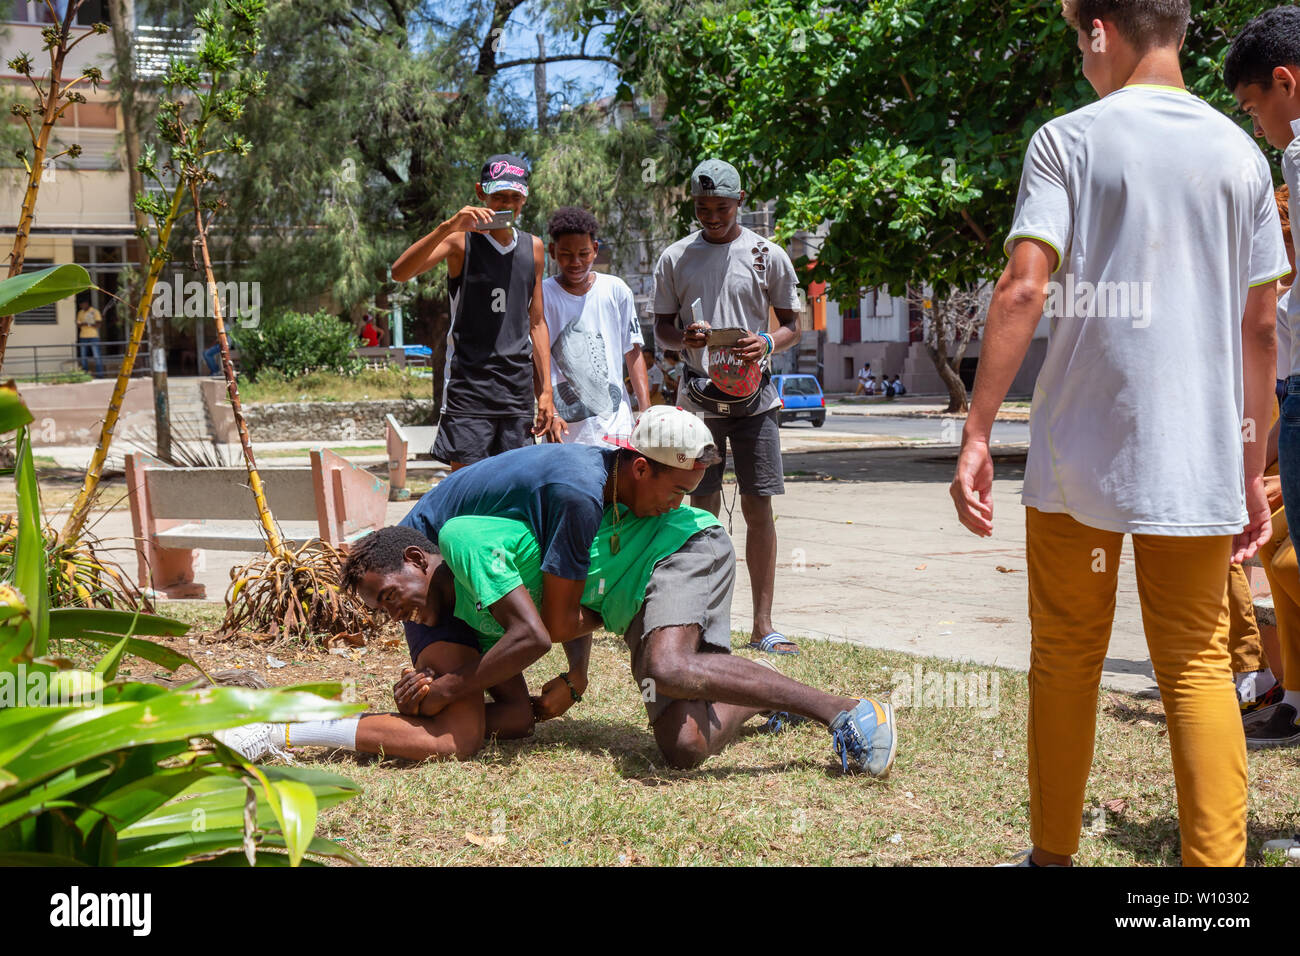 Havana, Cuba - May 14, 2019: Young Teenagers wrestling and having fun in a public square during a hot sunny day. Stock Photo